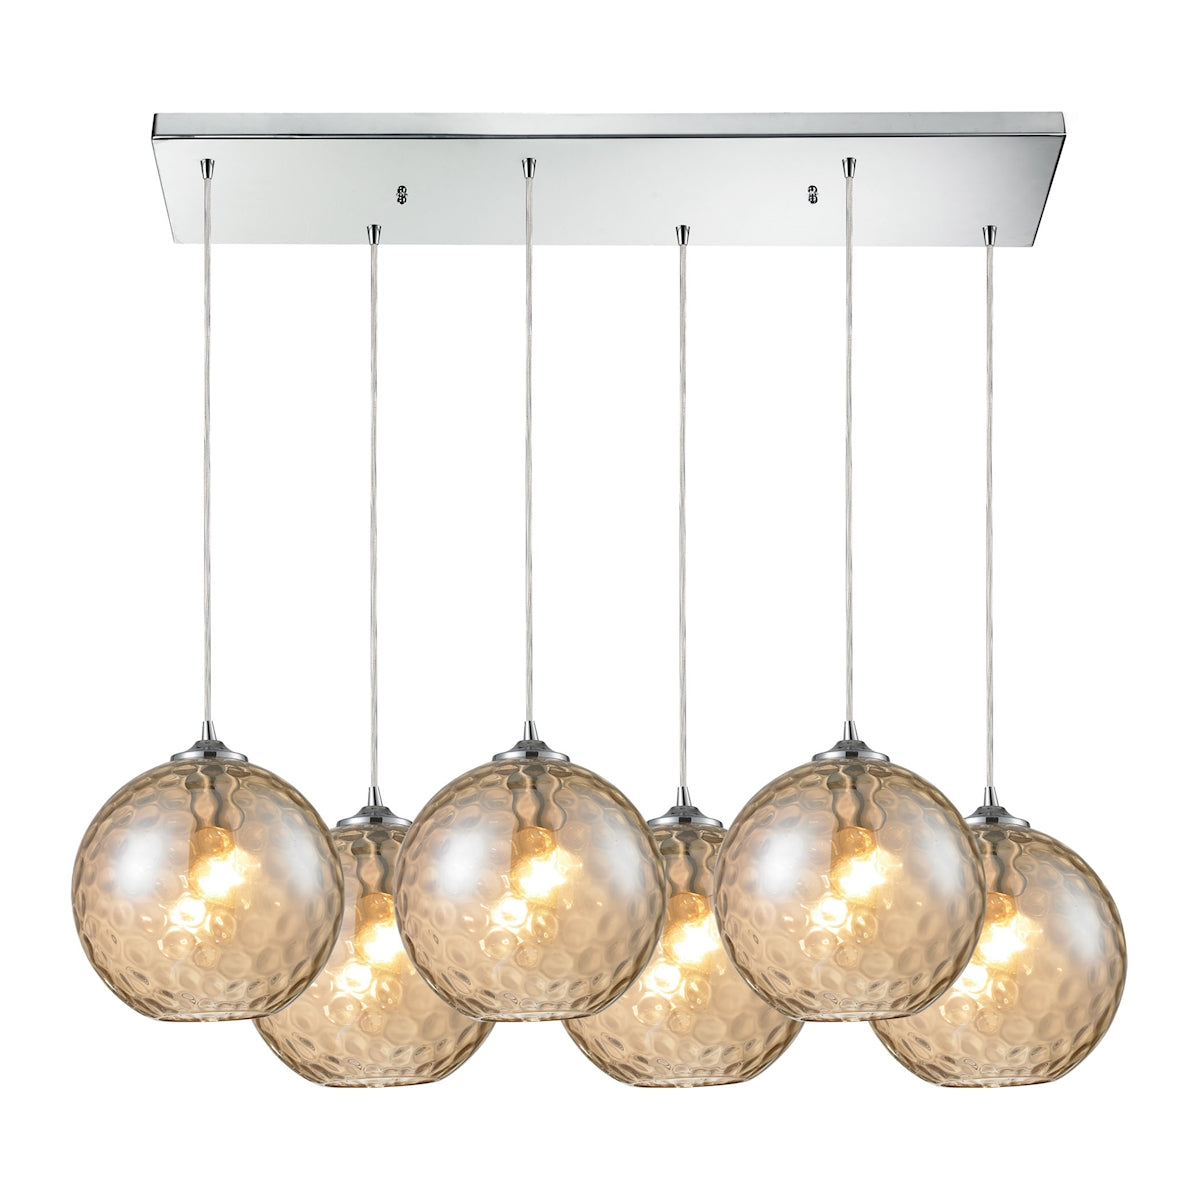 Watersphere 6-Light Rectangular Pendant Fixture in Chrome with Hammered Amber Glass